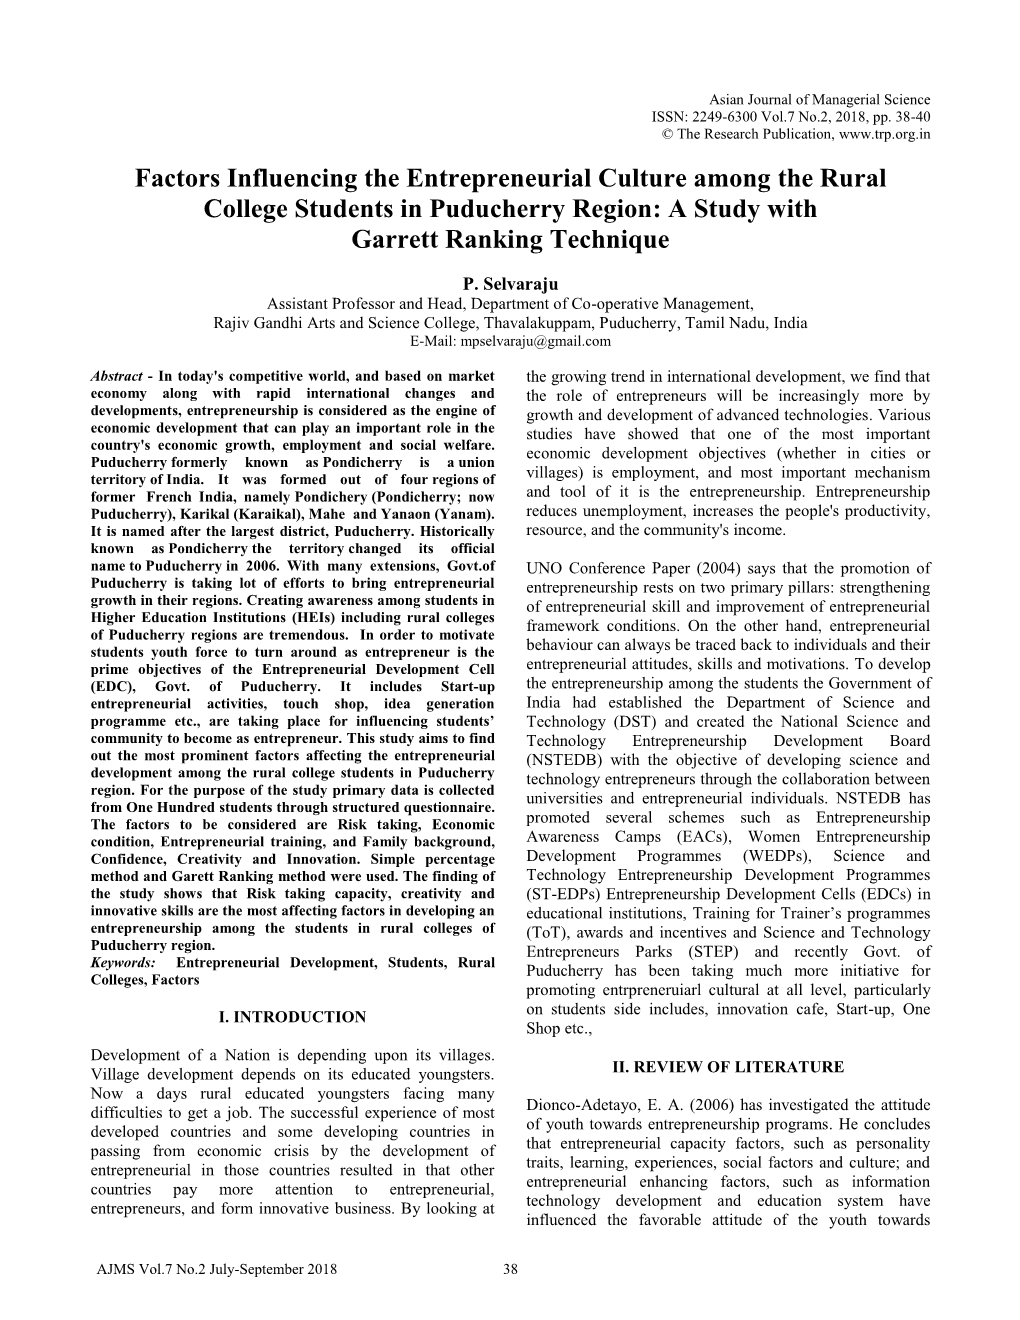 Factors Influencing the Entrepreneurial Culture Among the Rural College Students in Puducherry Region: a Study with Garrett Ranking Technique